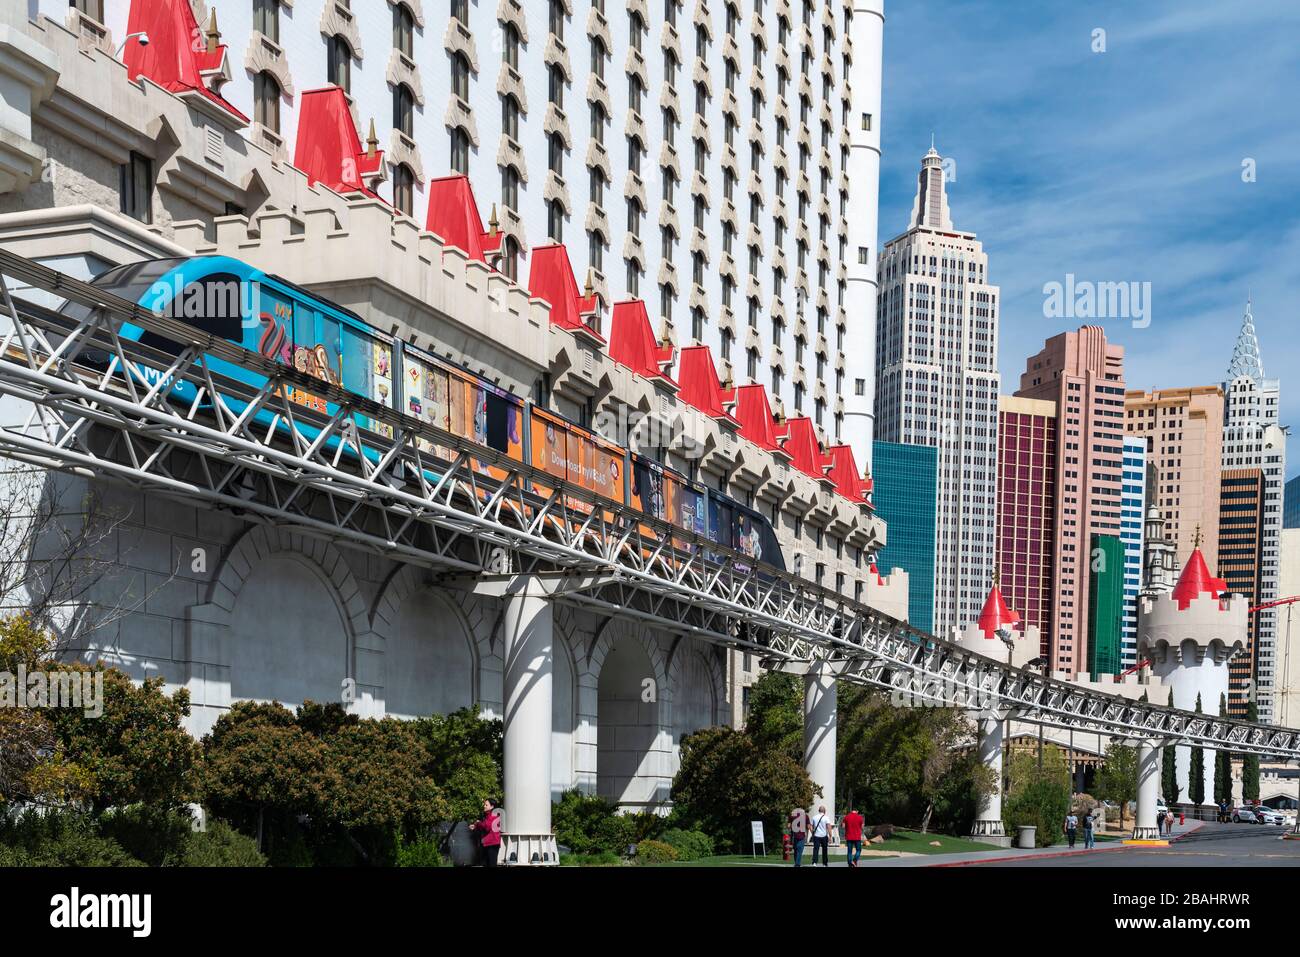 The monorail outside the Excalibur  Hotel and Casino along The Strip in Las Vegas, Nevada, USA. Stock Photo